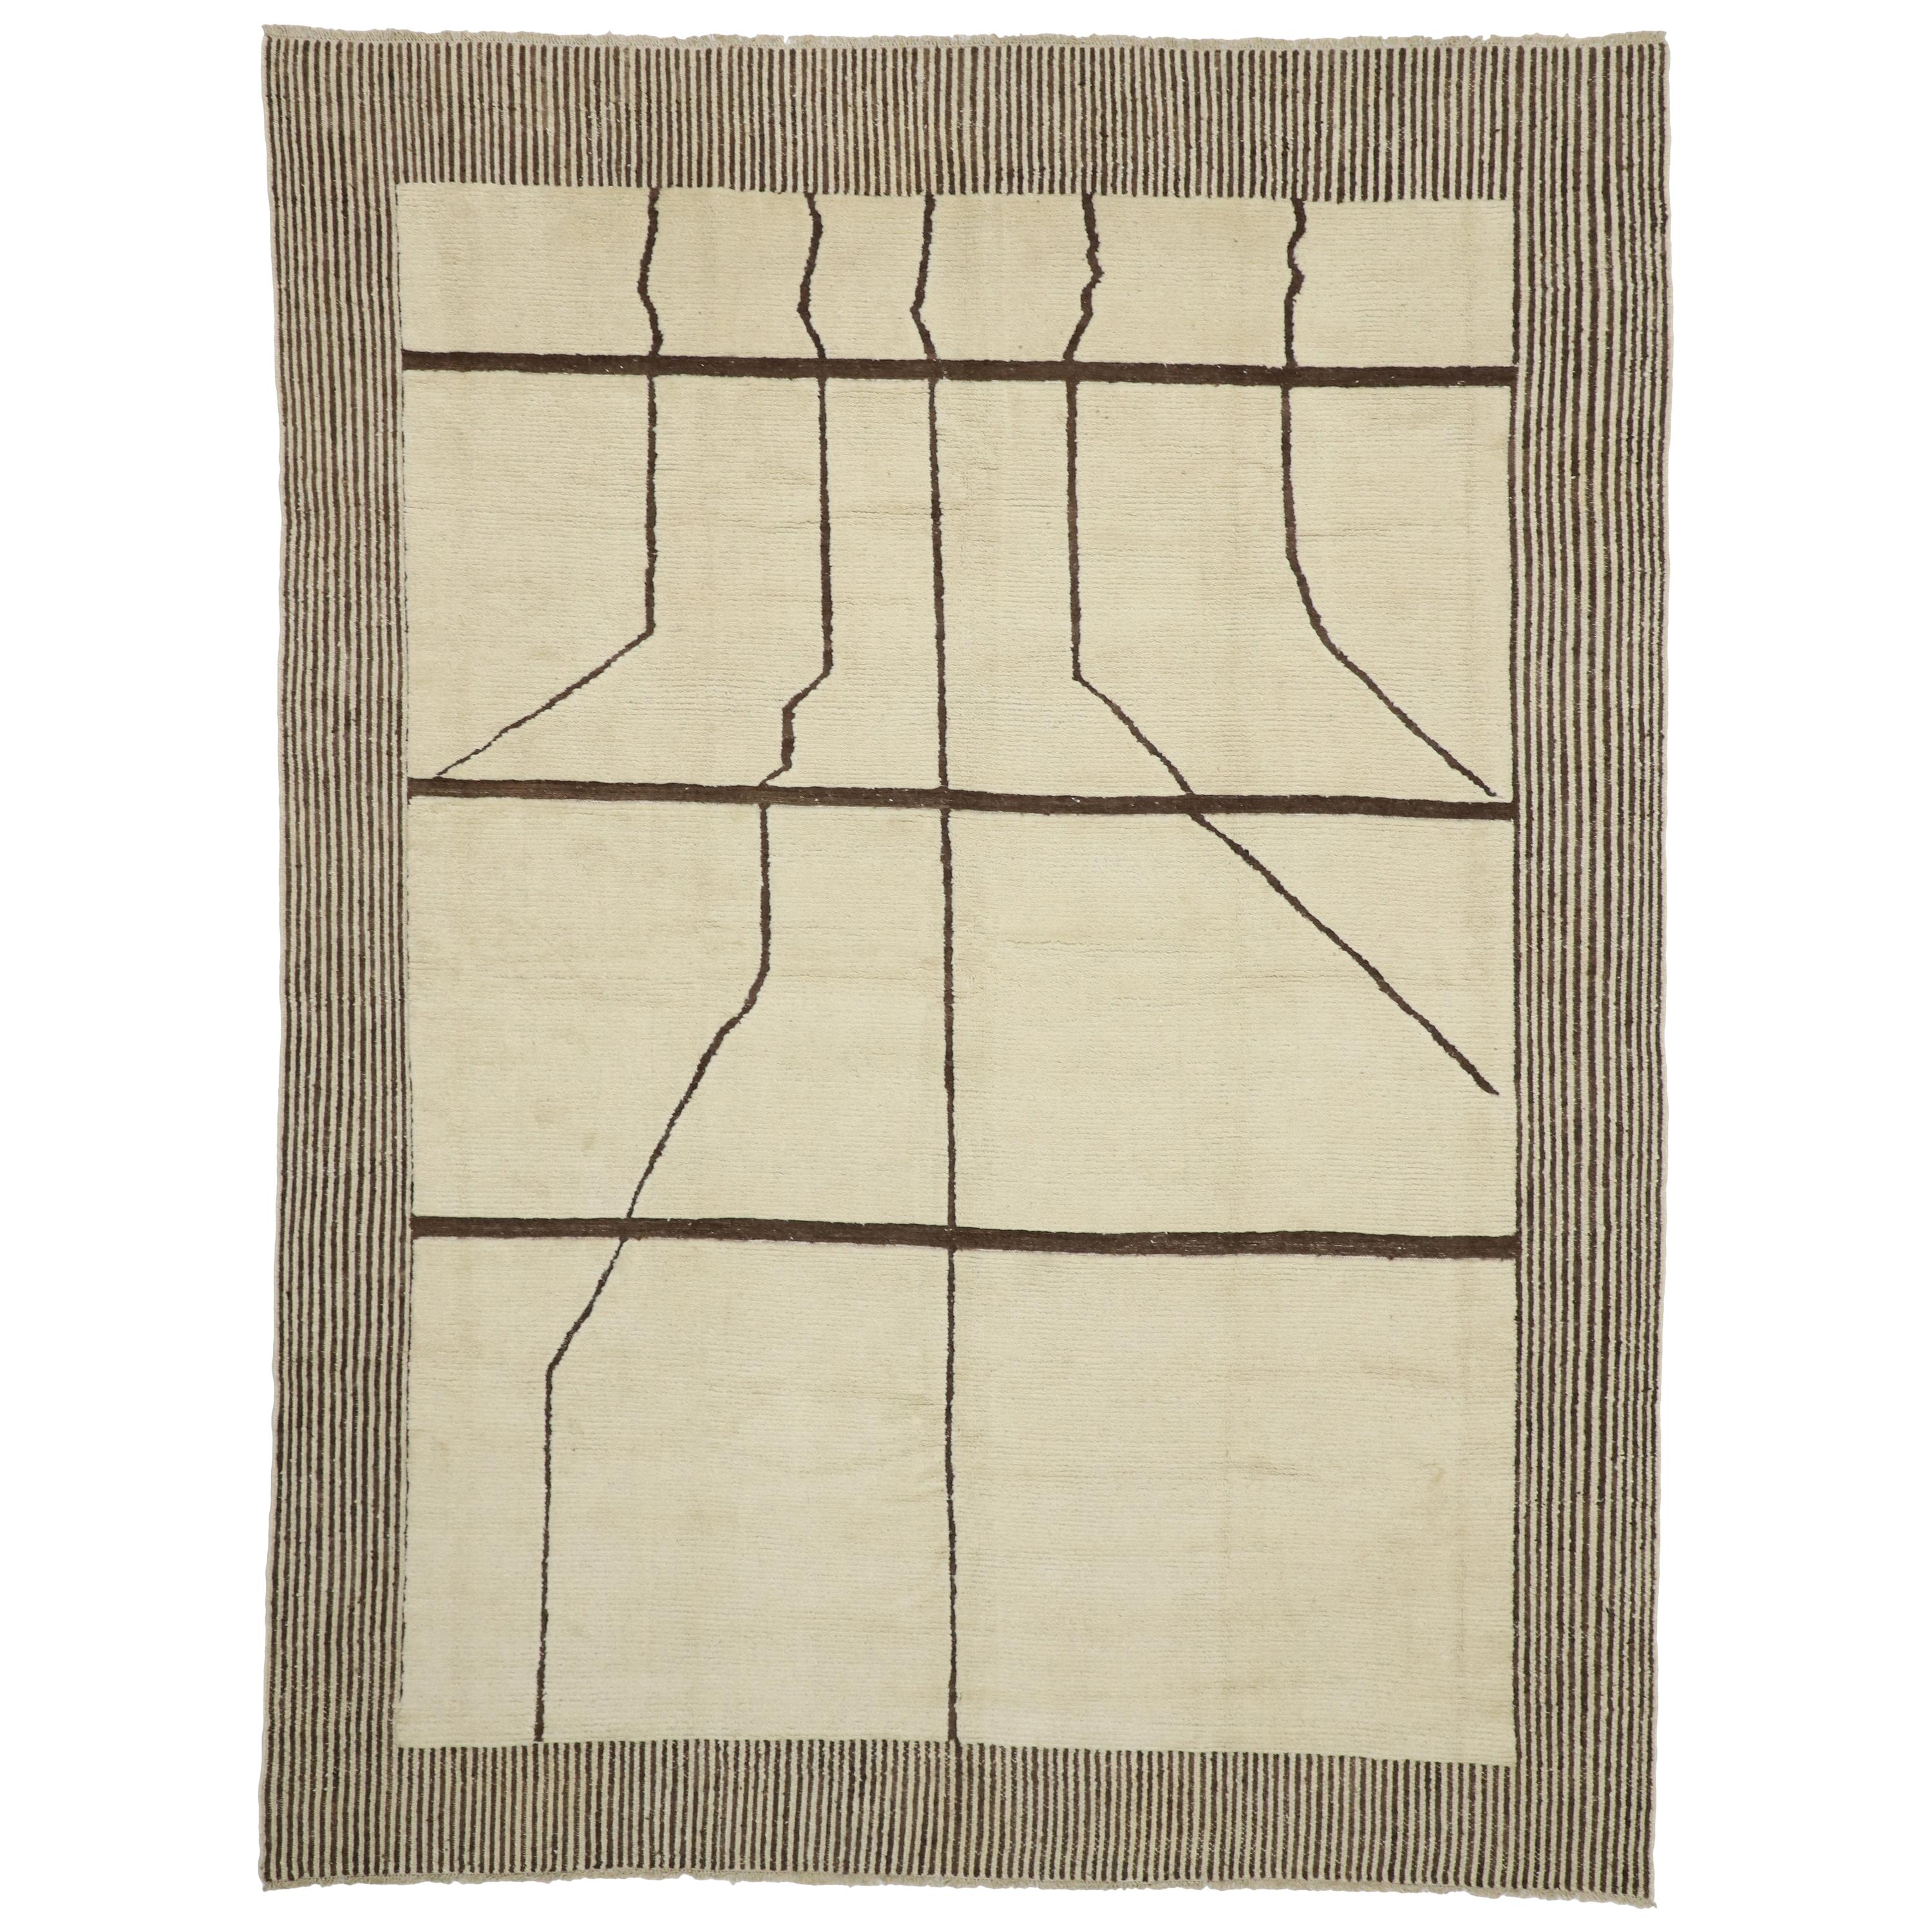 New Contemporary Moroccan Area Rug with Organic Modern Line Art Style For Sale